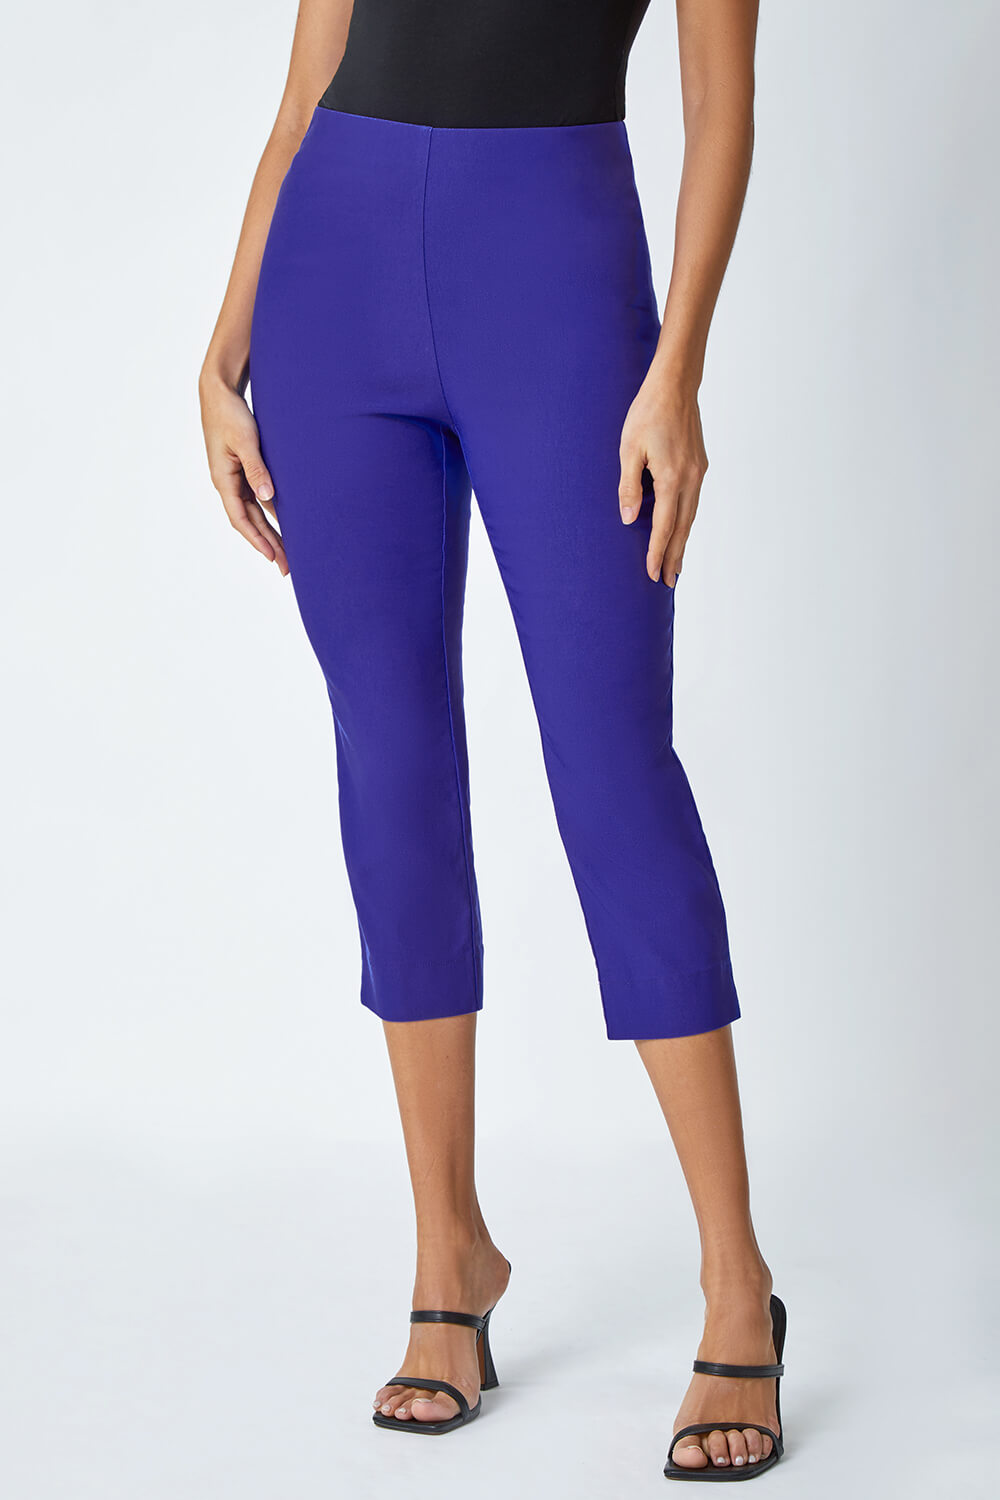 Purple Cropped Stretch Trouser, Image 4 of 5